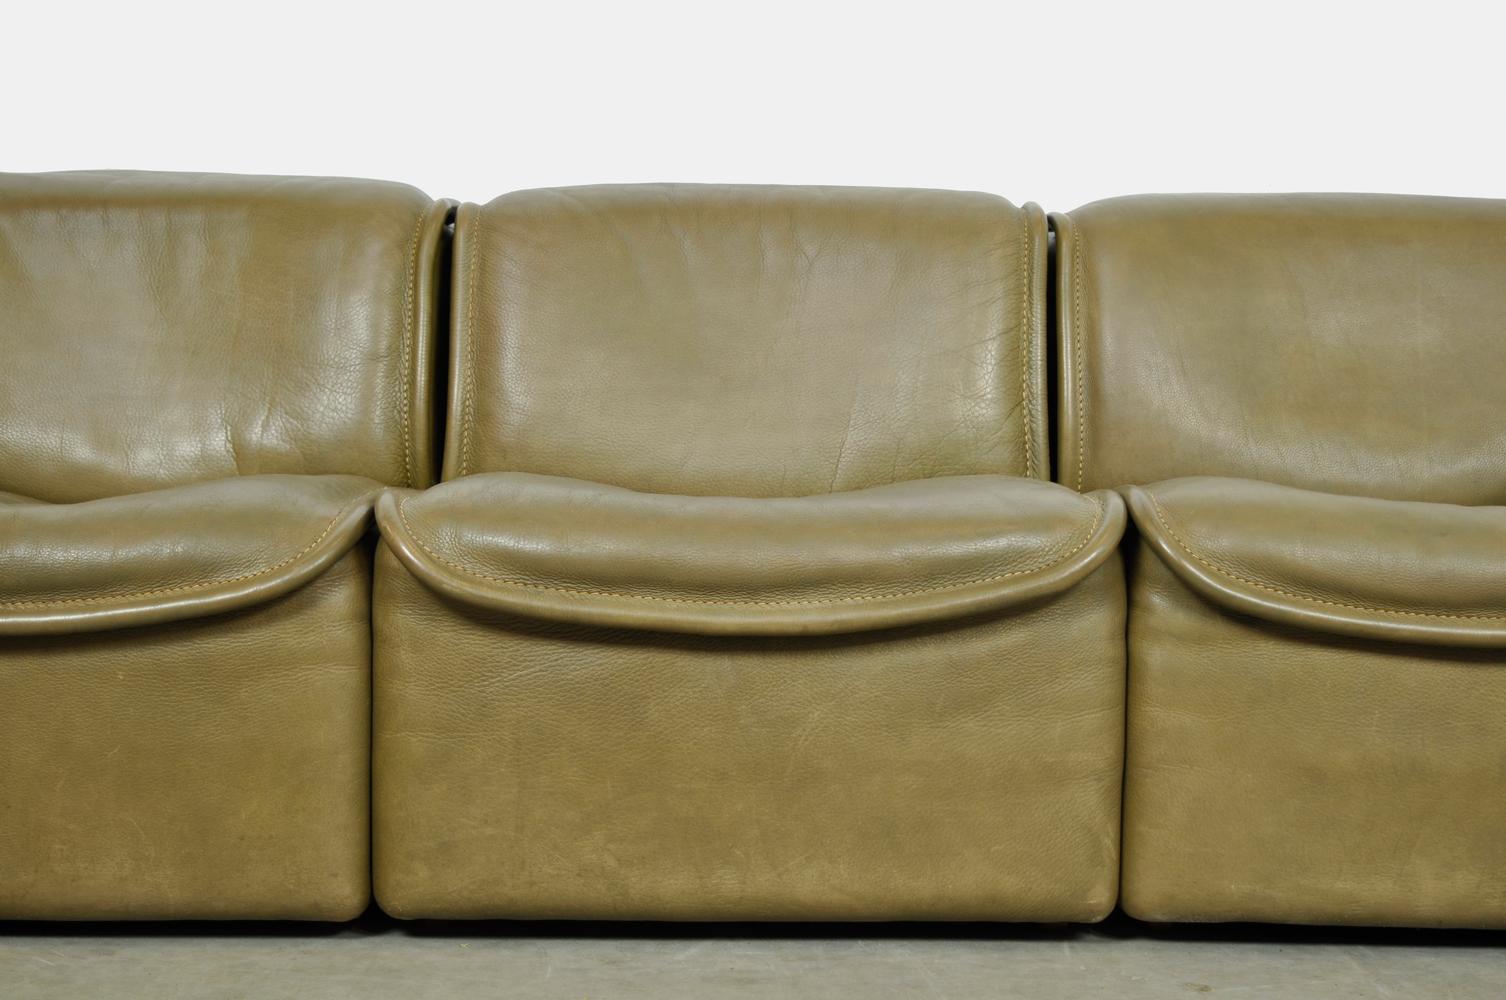 Olive Colored Leather 3-Seater Sofa, Model Ds-12 by De Sede, 1970s Switzerland For Sale 8